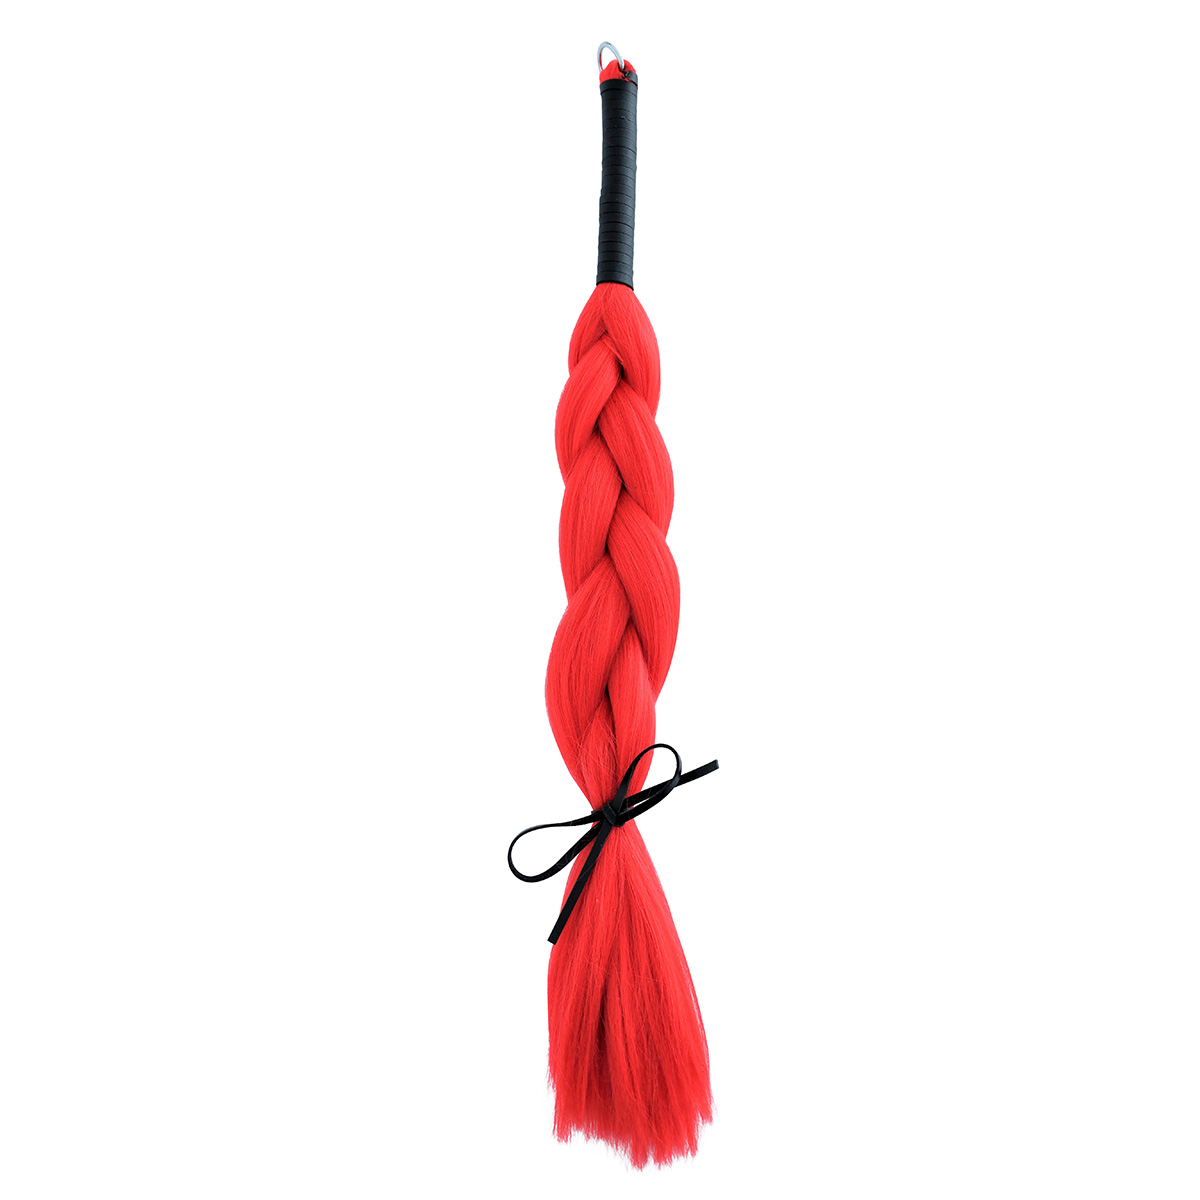 Hair-Whip-Red-Synthetic-134-KIO-0341-3